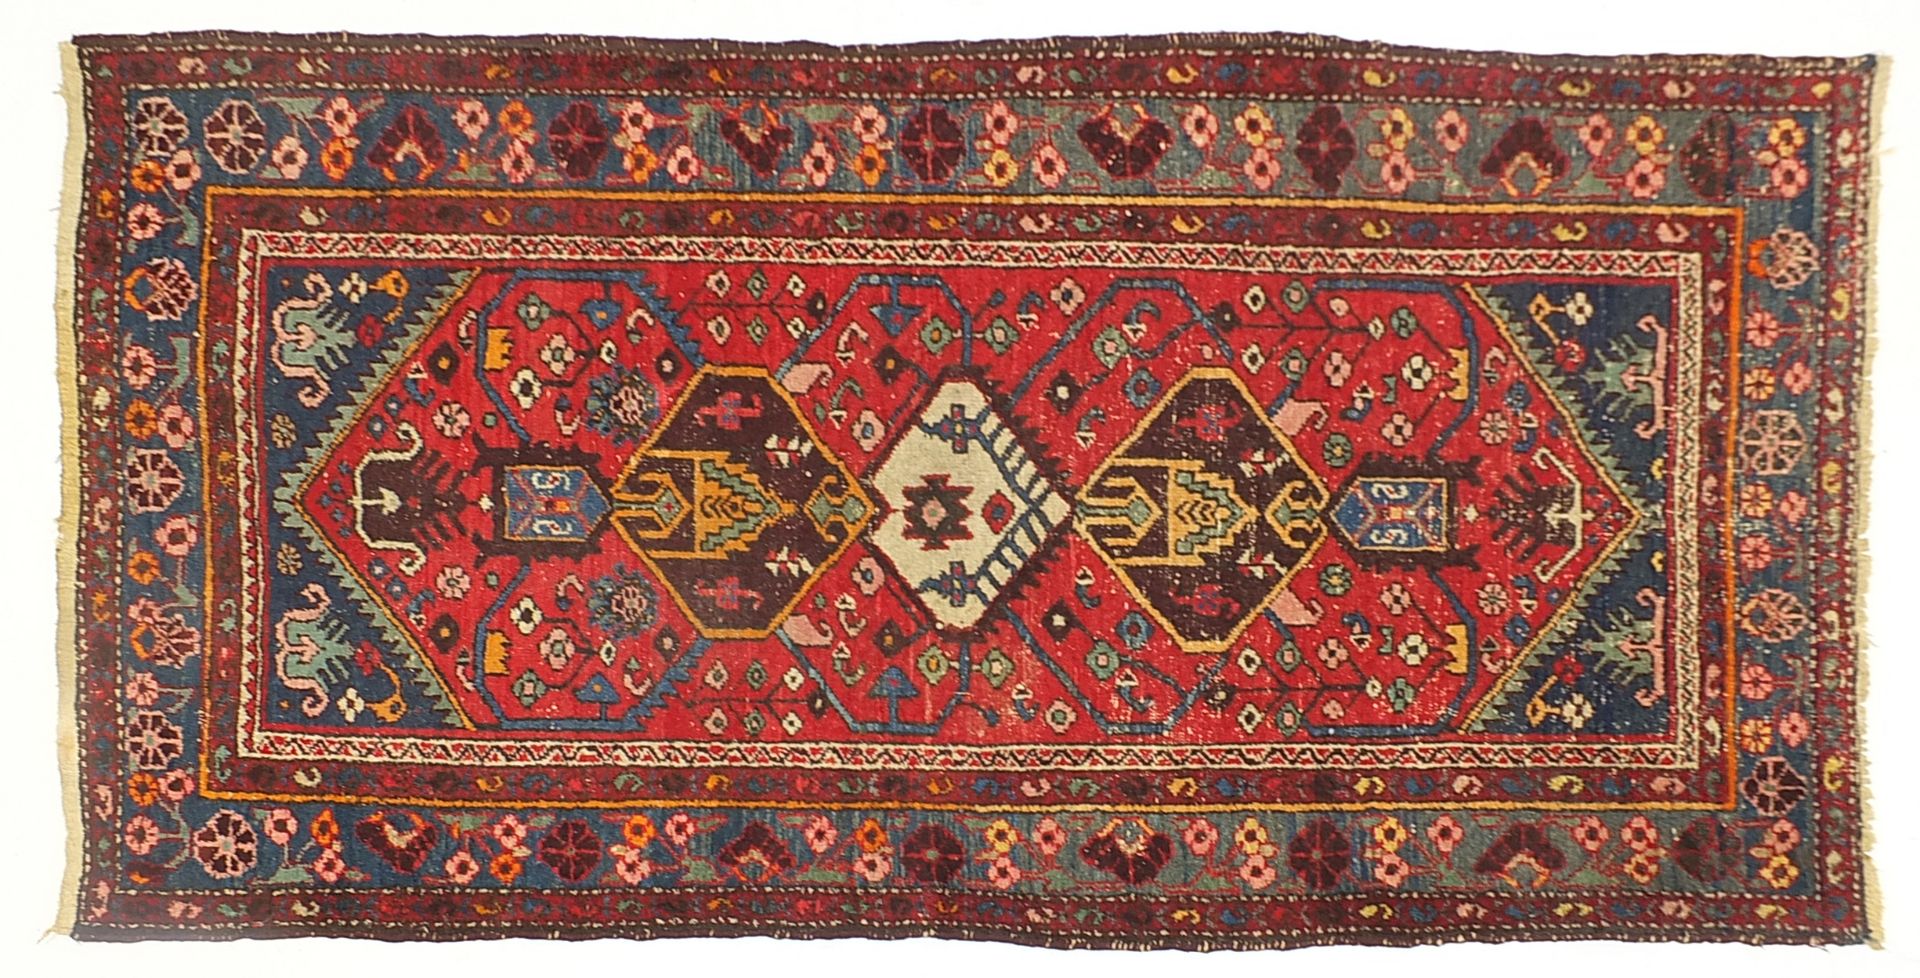 Red and blue ground rug with geometric design, 205cm x 110cm